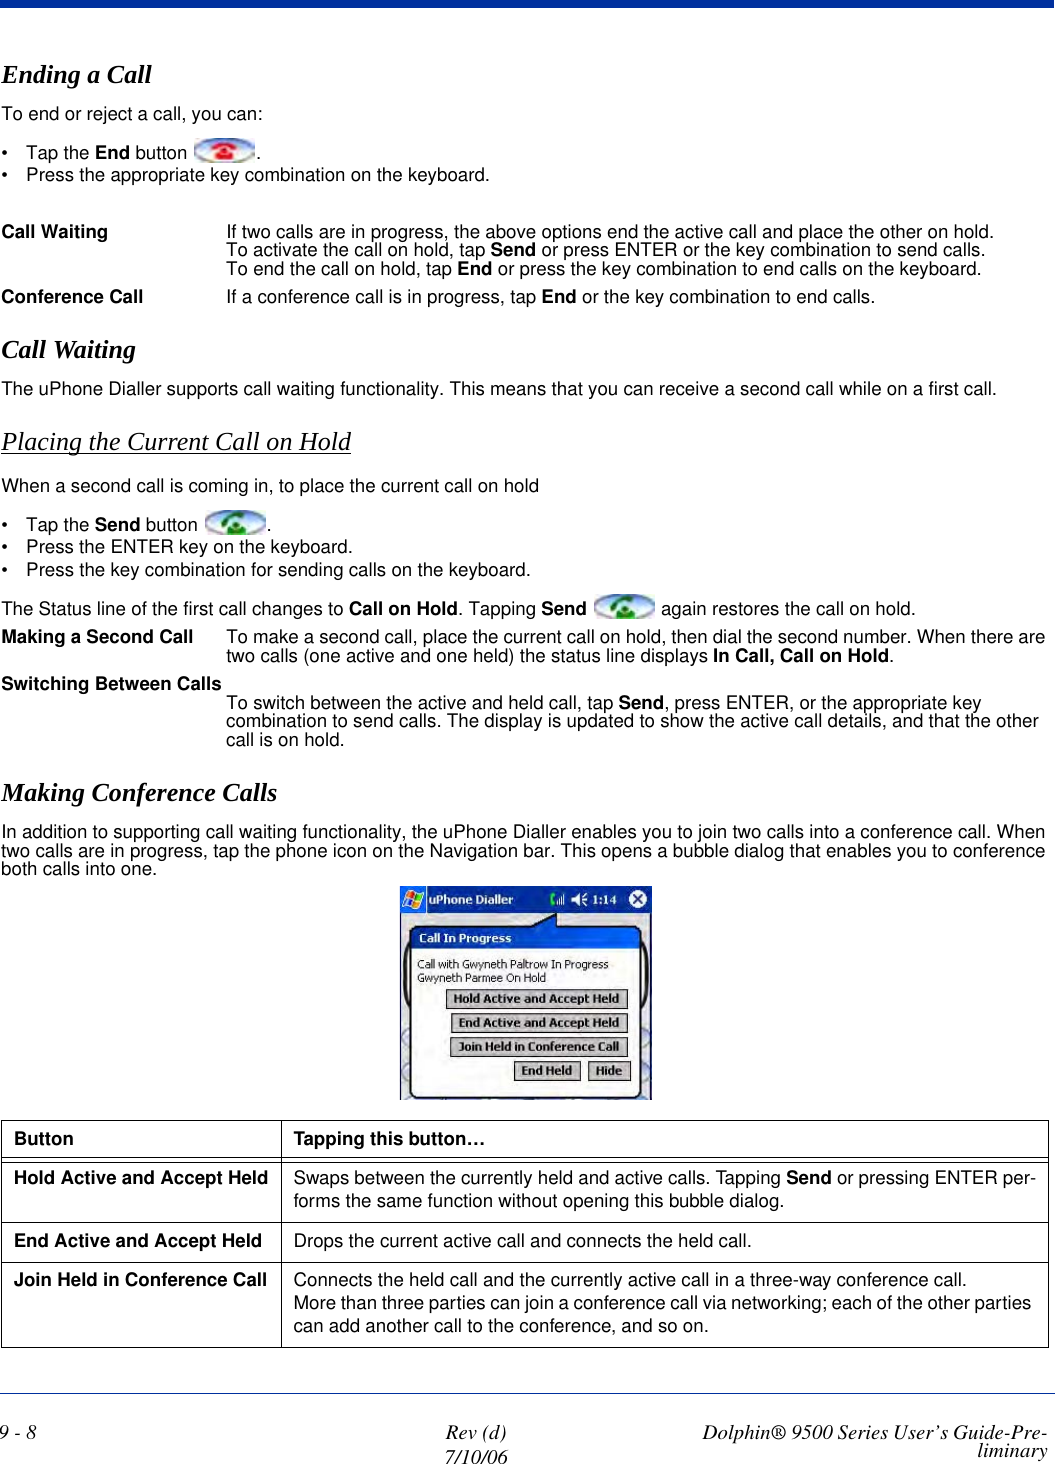 9 - 8 Rev (d)7/10/06 Dolphin® 9500 Series User’s Guide-Pre-liminaryEnding a CallTo end or reject a call, you can:•Tap the End button  .• Press the appropriate key combination on the keyboard.Call Waiting If two calls are in progress, the above options end the active call and place the other on hold. To activate the call on hold, tap Send or press ENTER or the key combination to send calls.To end the call on hold, tap End or press the key combination to end calls on the keyboard.Conference Call If a conference call is in progress, tap End or the key combination to end calls.Call WaitingThe uPhone Dialler supports call waiting functionality. This means that you can receive a second call while on a first call.Placing the Current Call on HoldWhen a second call is coming in, to place the current call on hold •Tap the Send button  .• Press the ENTER key on the keyboard.• Press the key combination for sending calls on the keyboard.The Status line of the first call changes to Call on Hold. Tapping Send   again restores the call on hold.Making a Second Call To make a second call, place the current call on hold, then dial the second number. When there are two calls (one active and one held) the status line displays In Call, Call on Hold.Switching Between Calls To switch between the active and held call, tap Send, press ENTER, or the appropriate key combination to send calls. The display is updated to show the active call details, and that the other call is on hold.Making Conference CallsIn addition to supporting call waiting functionality, the uPhone Dialler enables you to join two calls into a conference call. When two calls are in progress, tap the phone icon on the Navigation bar. This opens a bubble dialog that enables you to conference both calls into one. Button Tapping this button…Hold Active and Accept Held Swaps between the currently held and active calls. Tapping Send or pressing ENTER per-forms the same function without opening this bubble dialog.End Active and Accept Held  Drops the current active call and connects the held call.Join Held in Conference Call Connects the held call and the currently active call in a three-way conference call.More than three parties can join a conference call via networking; each of the other parties can add another call to the conference, and so on.